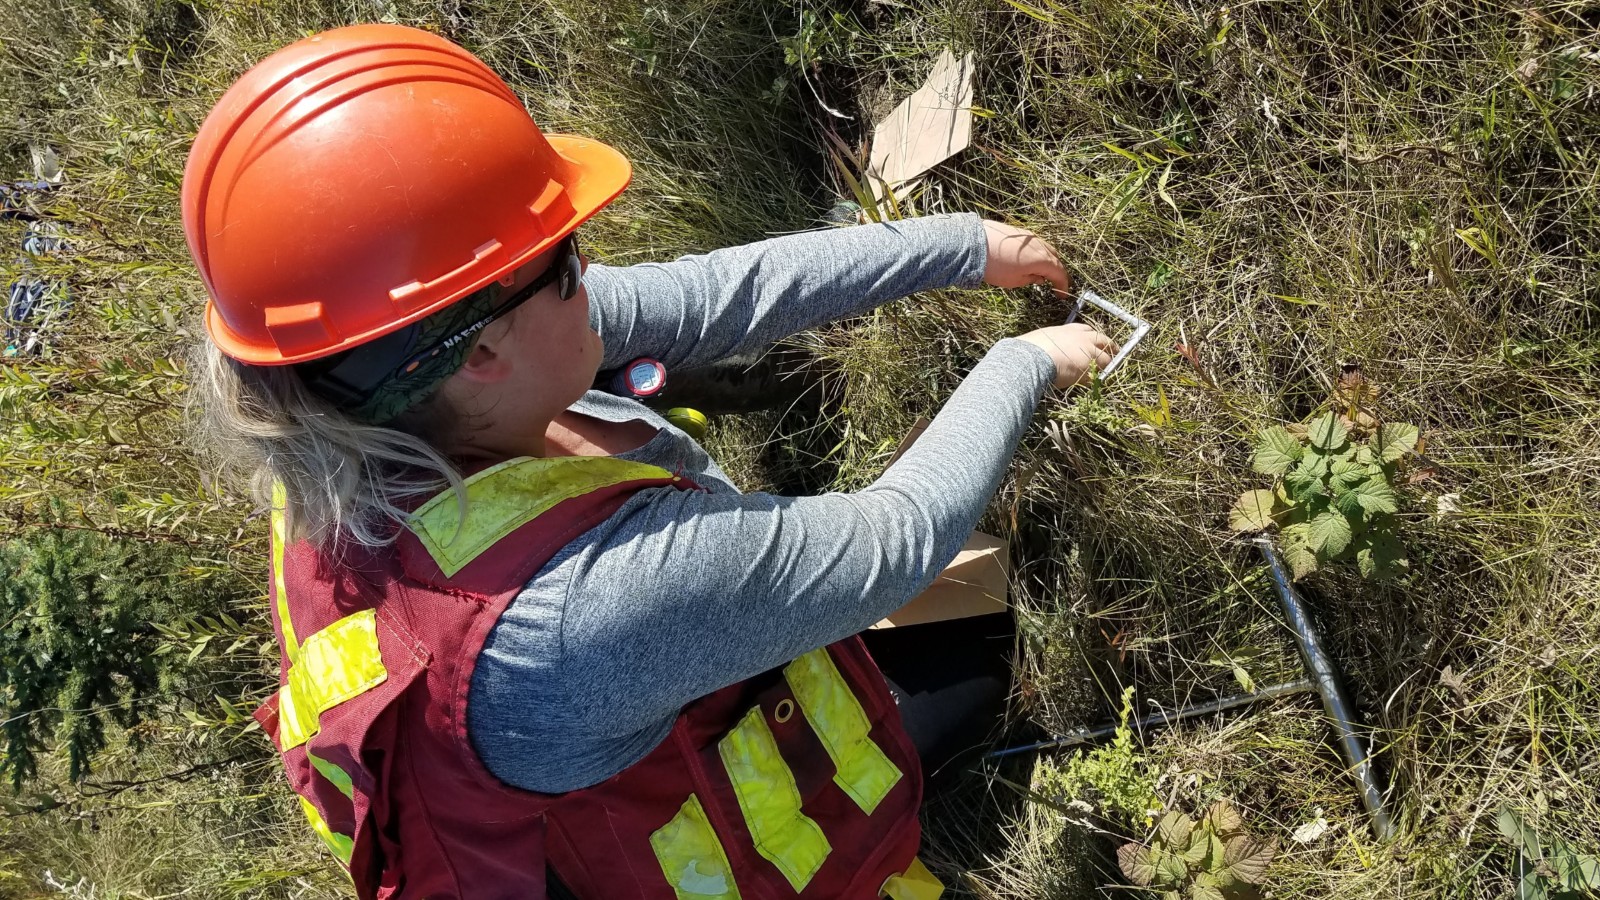 Researcher Stephanie Chute-Ibsen collects plant litter samples from a land reclamation site in September 2019. Chute-Ibsen says soil dwellers like bugs and worms could indicate how well reclamation efforts are working to restore healthy ecosystems. 